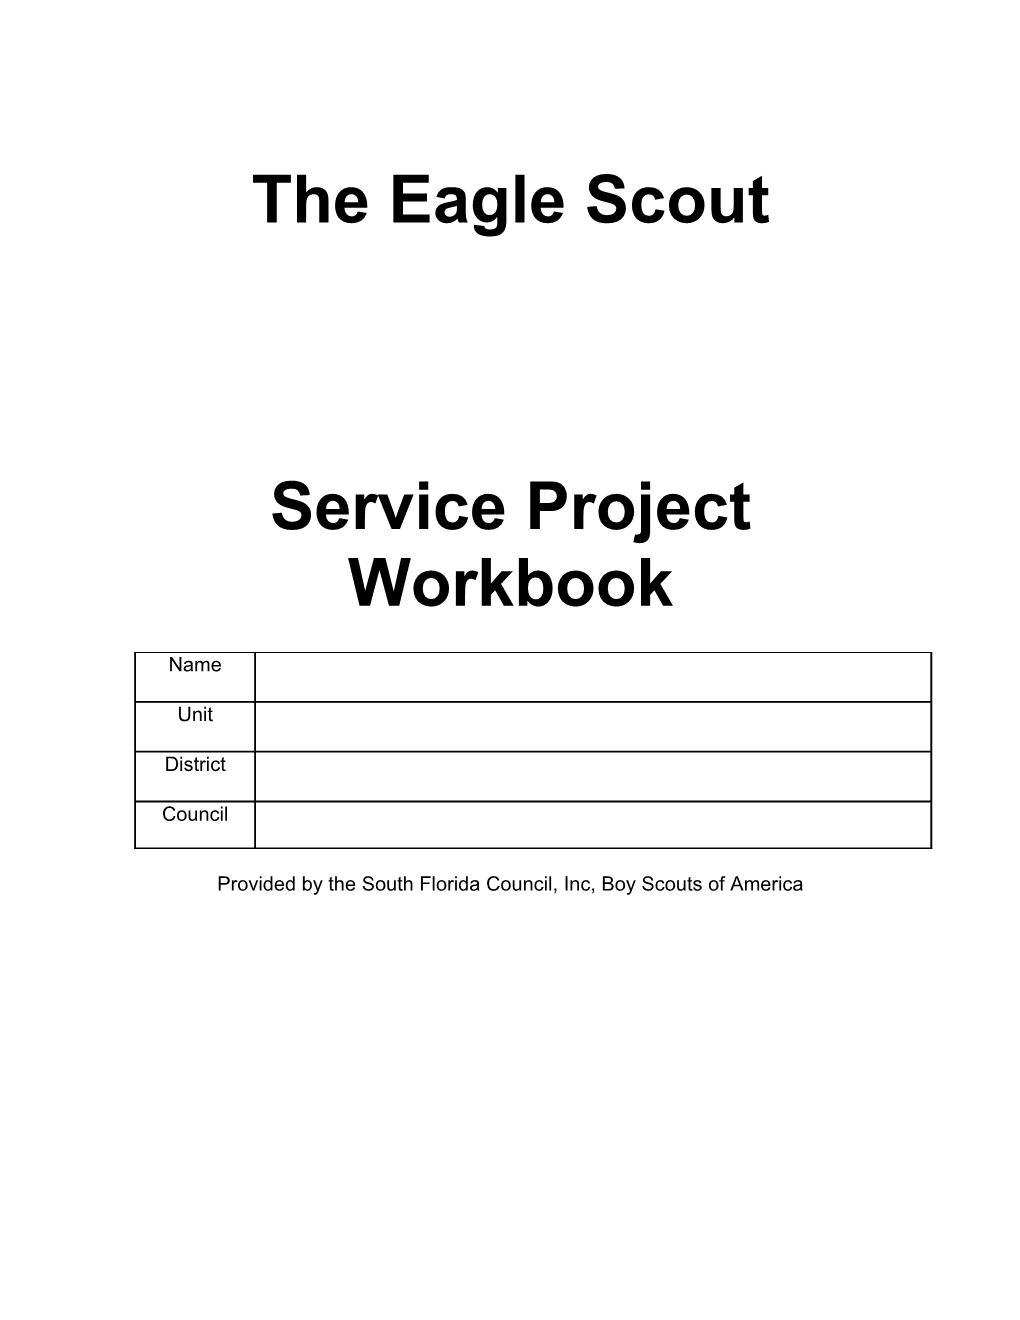 The Eagle Scout